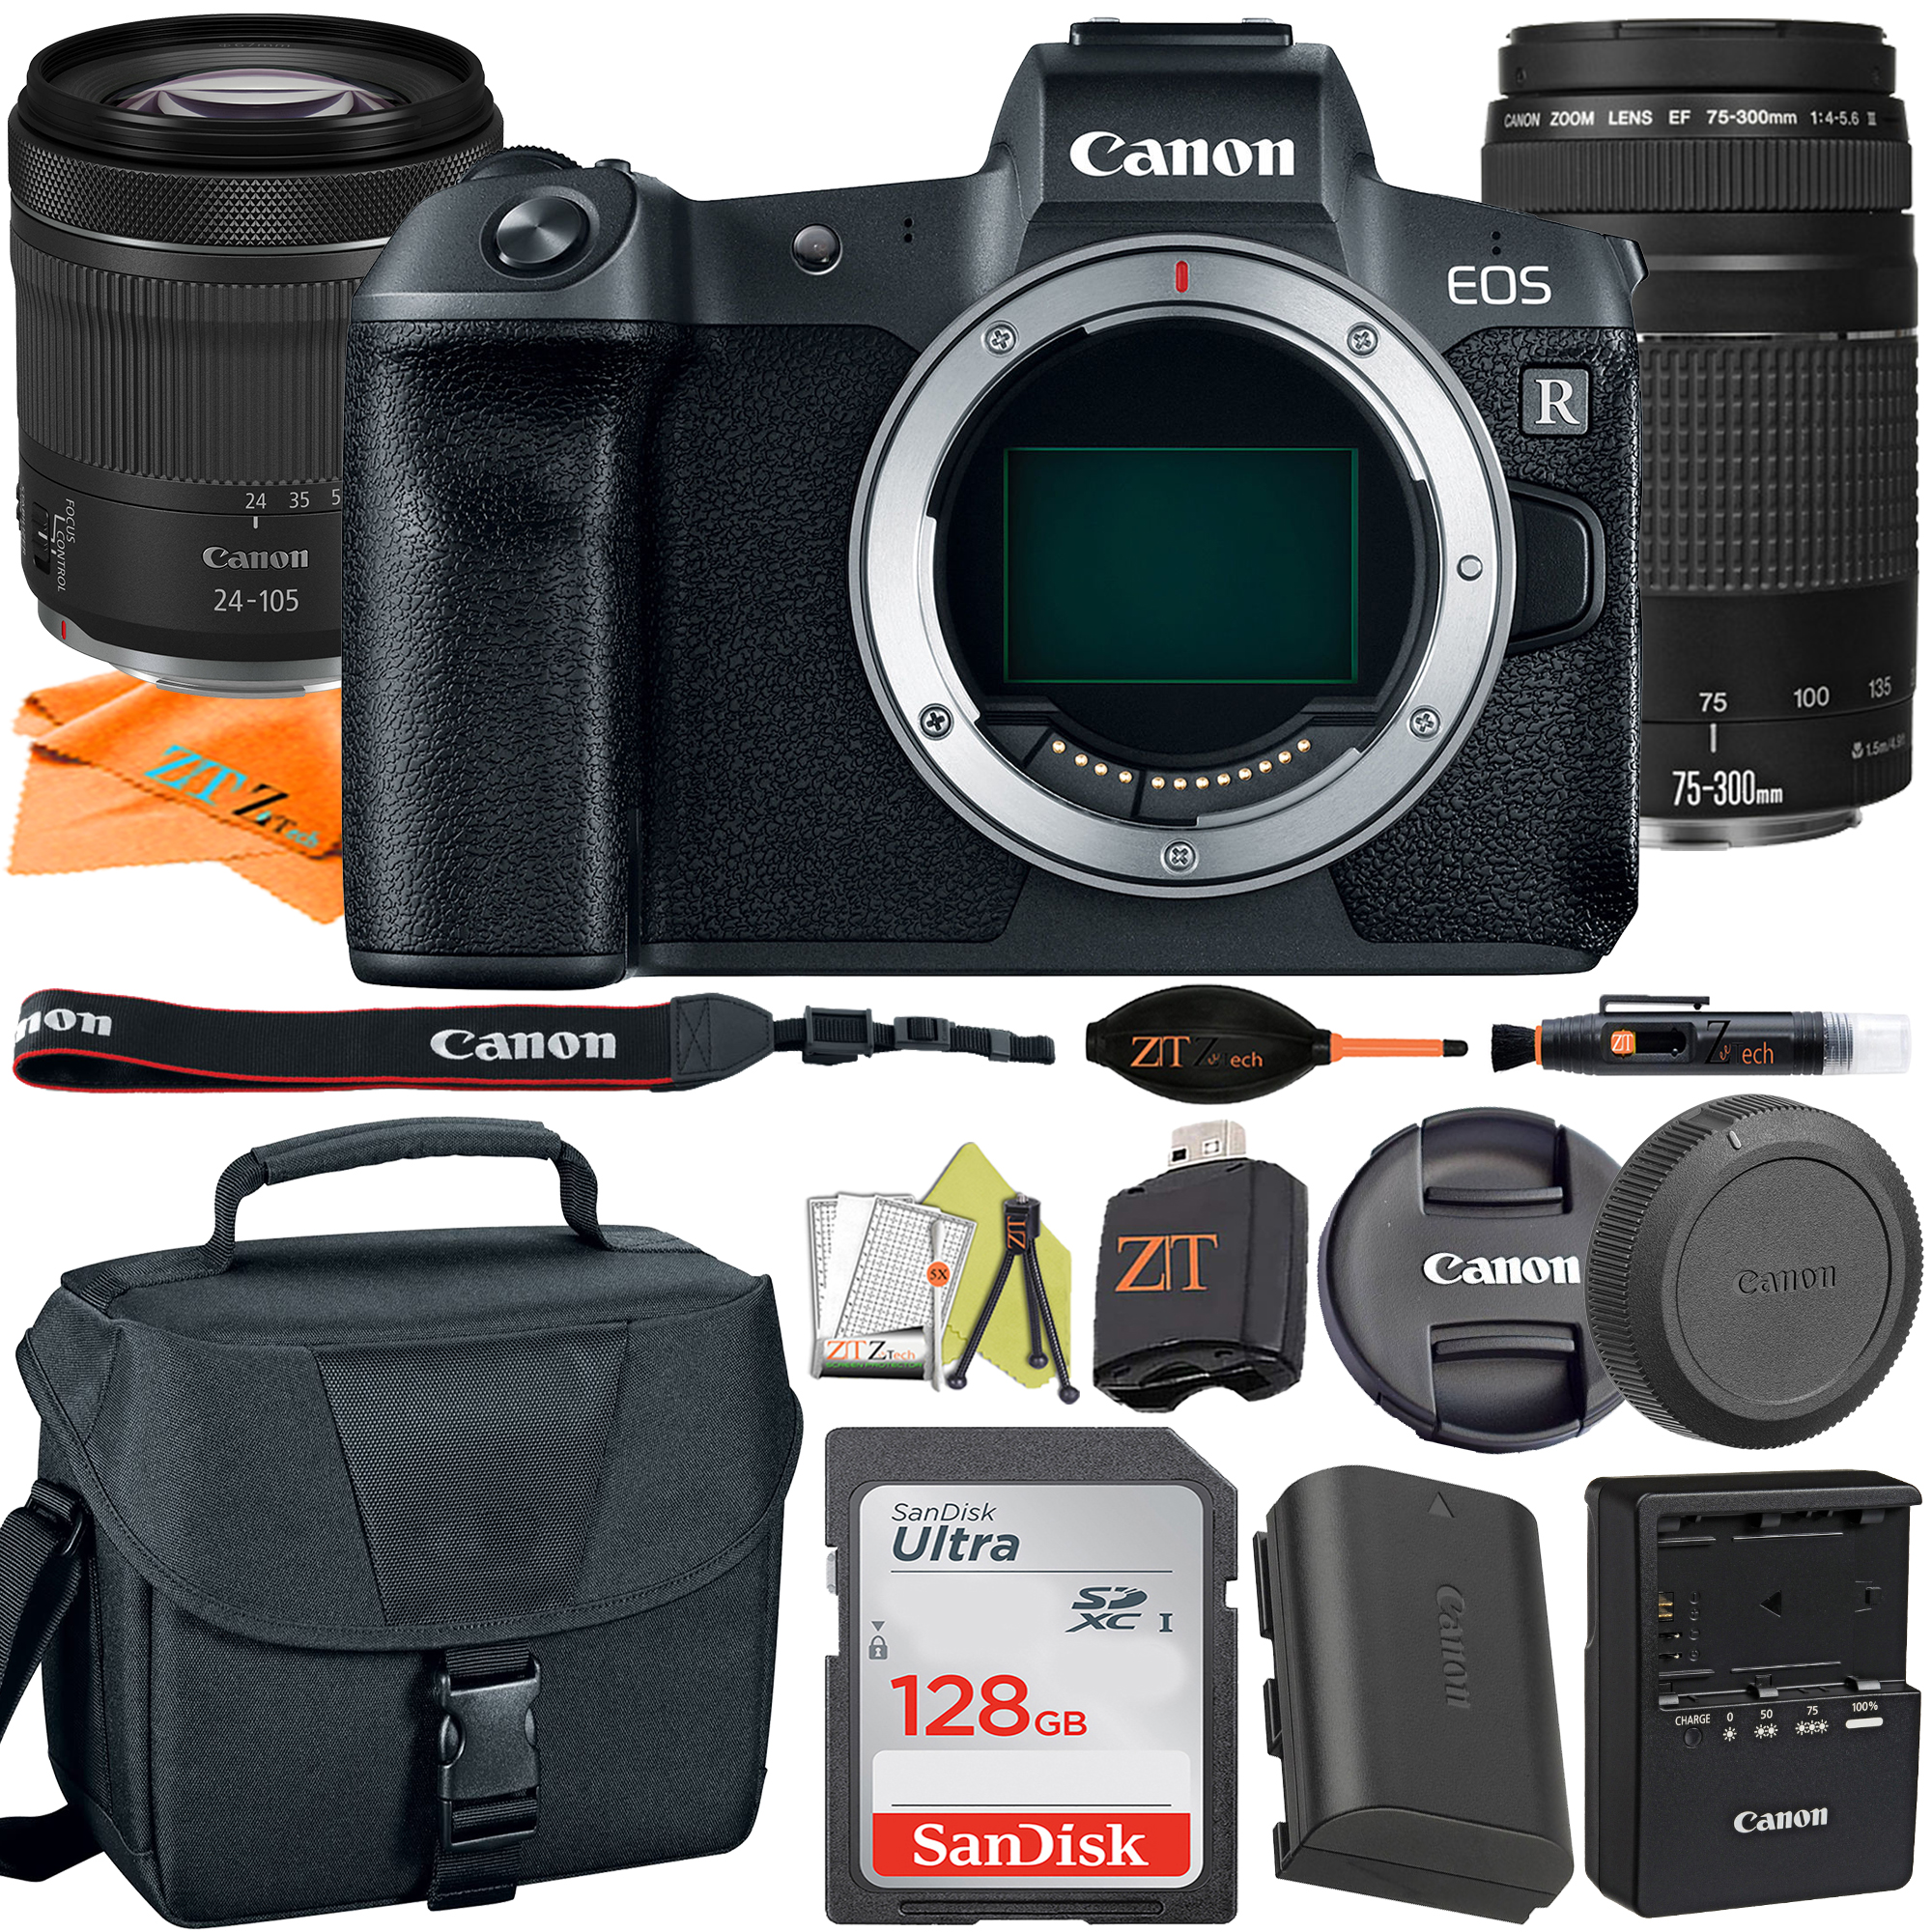 Canon EOS R Mirrorless Digital Camera with RF24-105mm STM + 75-300mm Lens + SanDisk 128GB + Case + ZeeTech Accessory